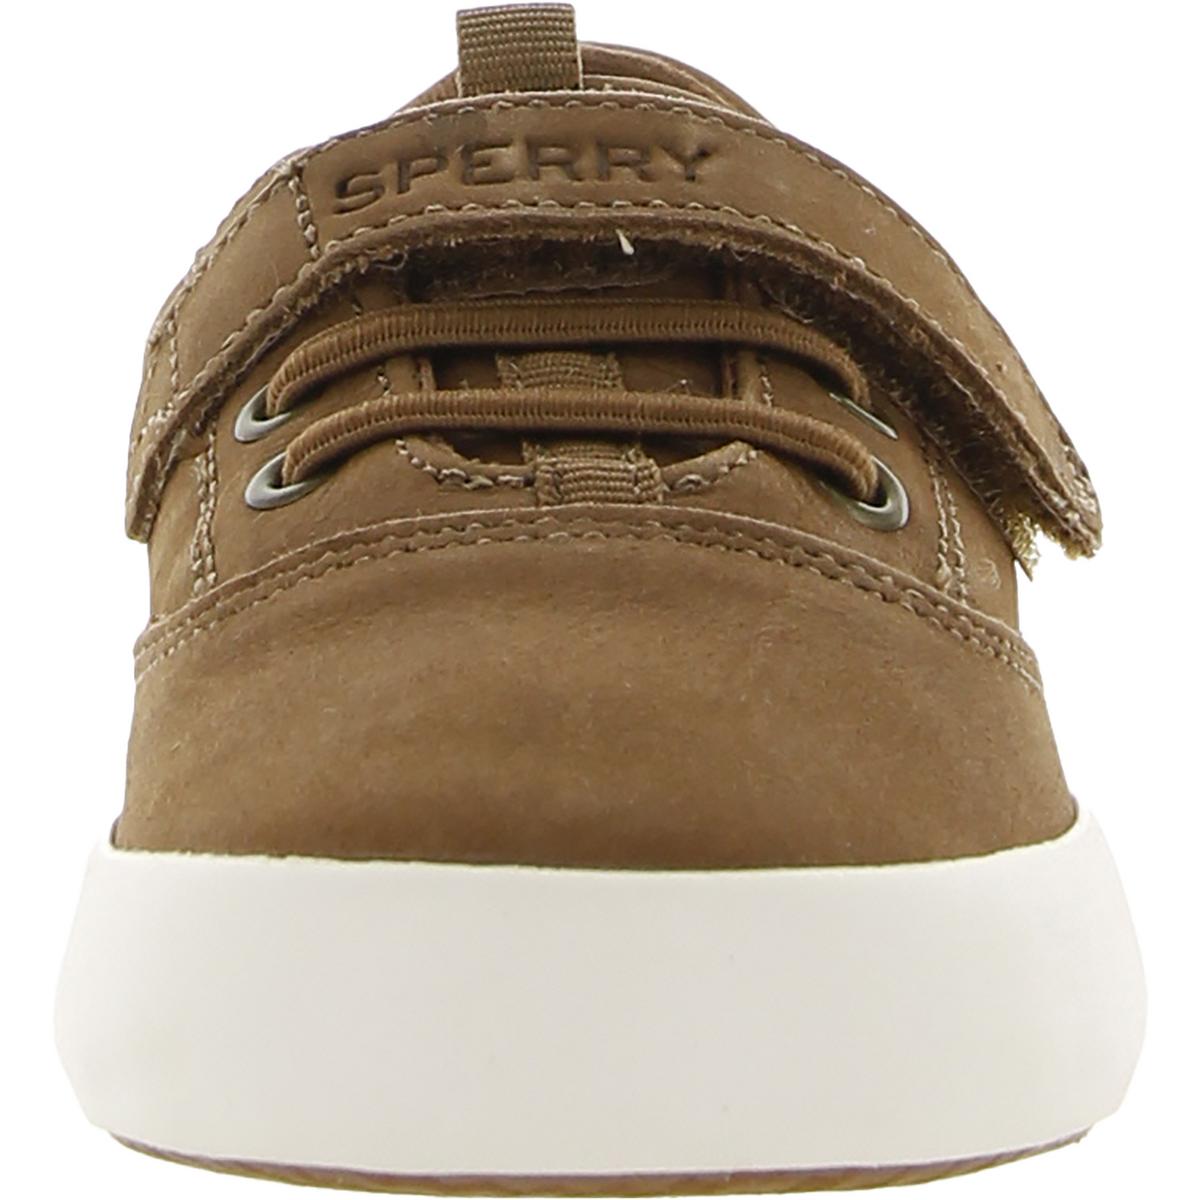 Sperry Spinnaker Washable Jr Boys Leather Sneakers Slip-On Shoes